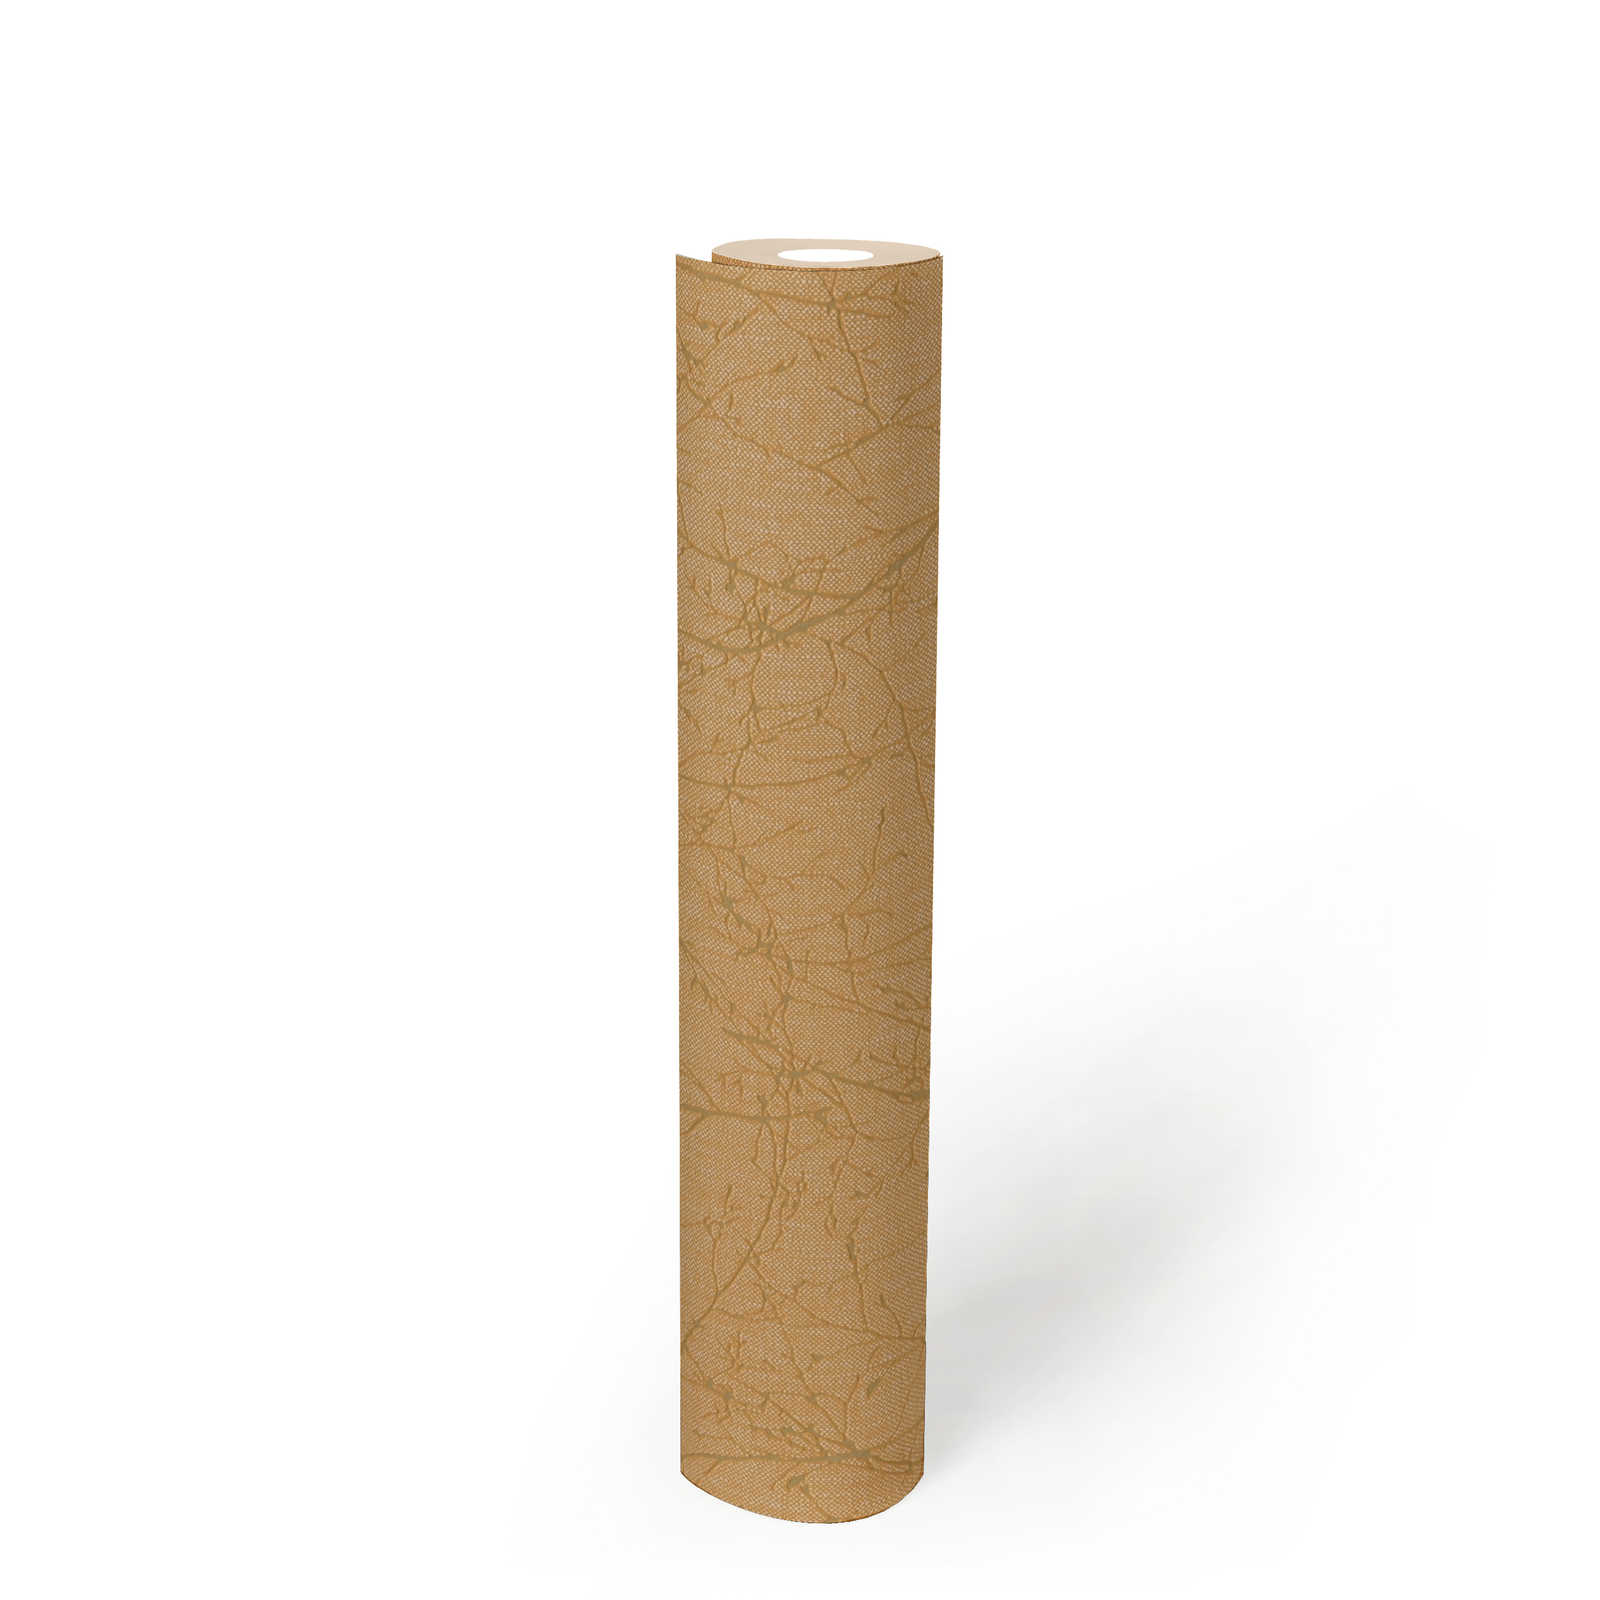             Non-woven wallpaper with branch pattern and light structure - gold, yellow
        